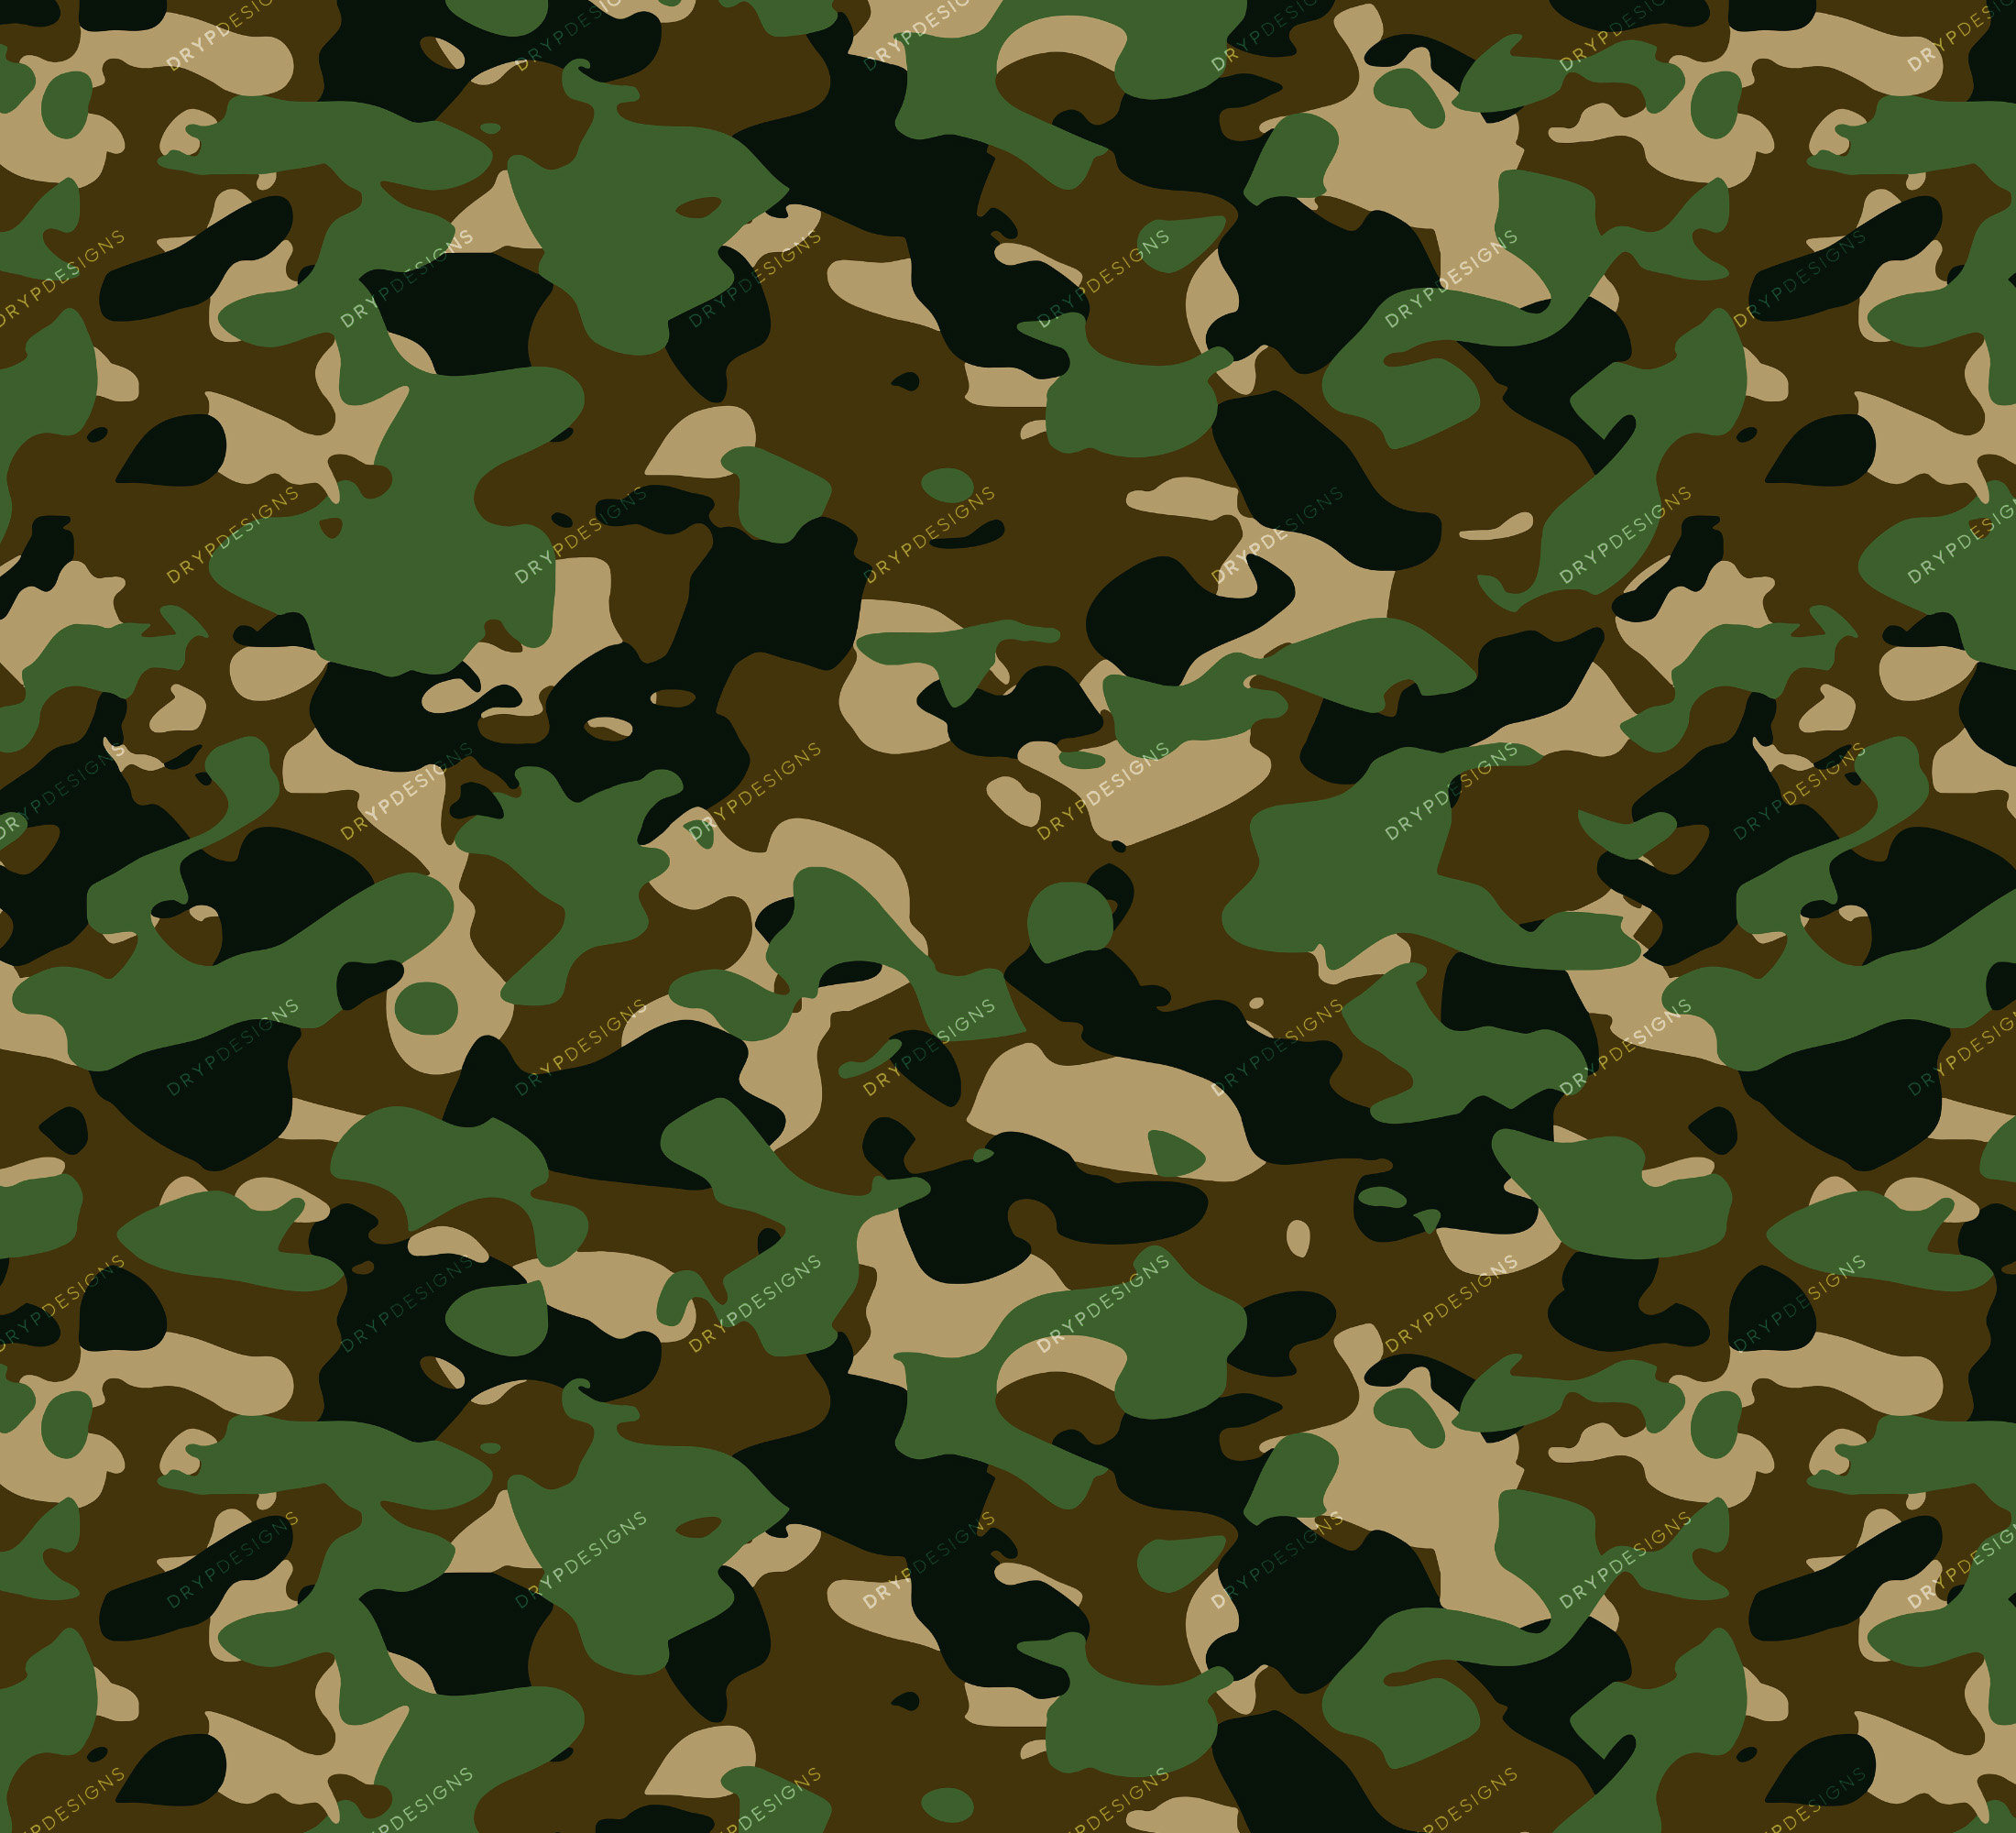 Buy Military Green Camouflage Seamless Digital Paper Background